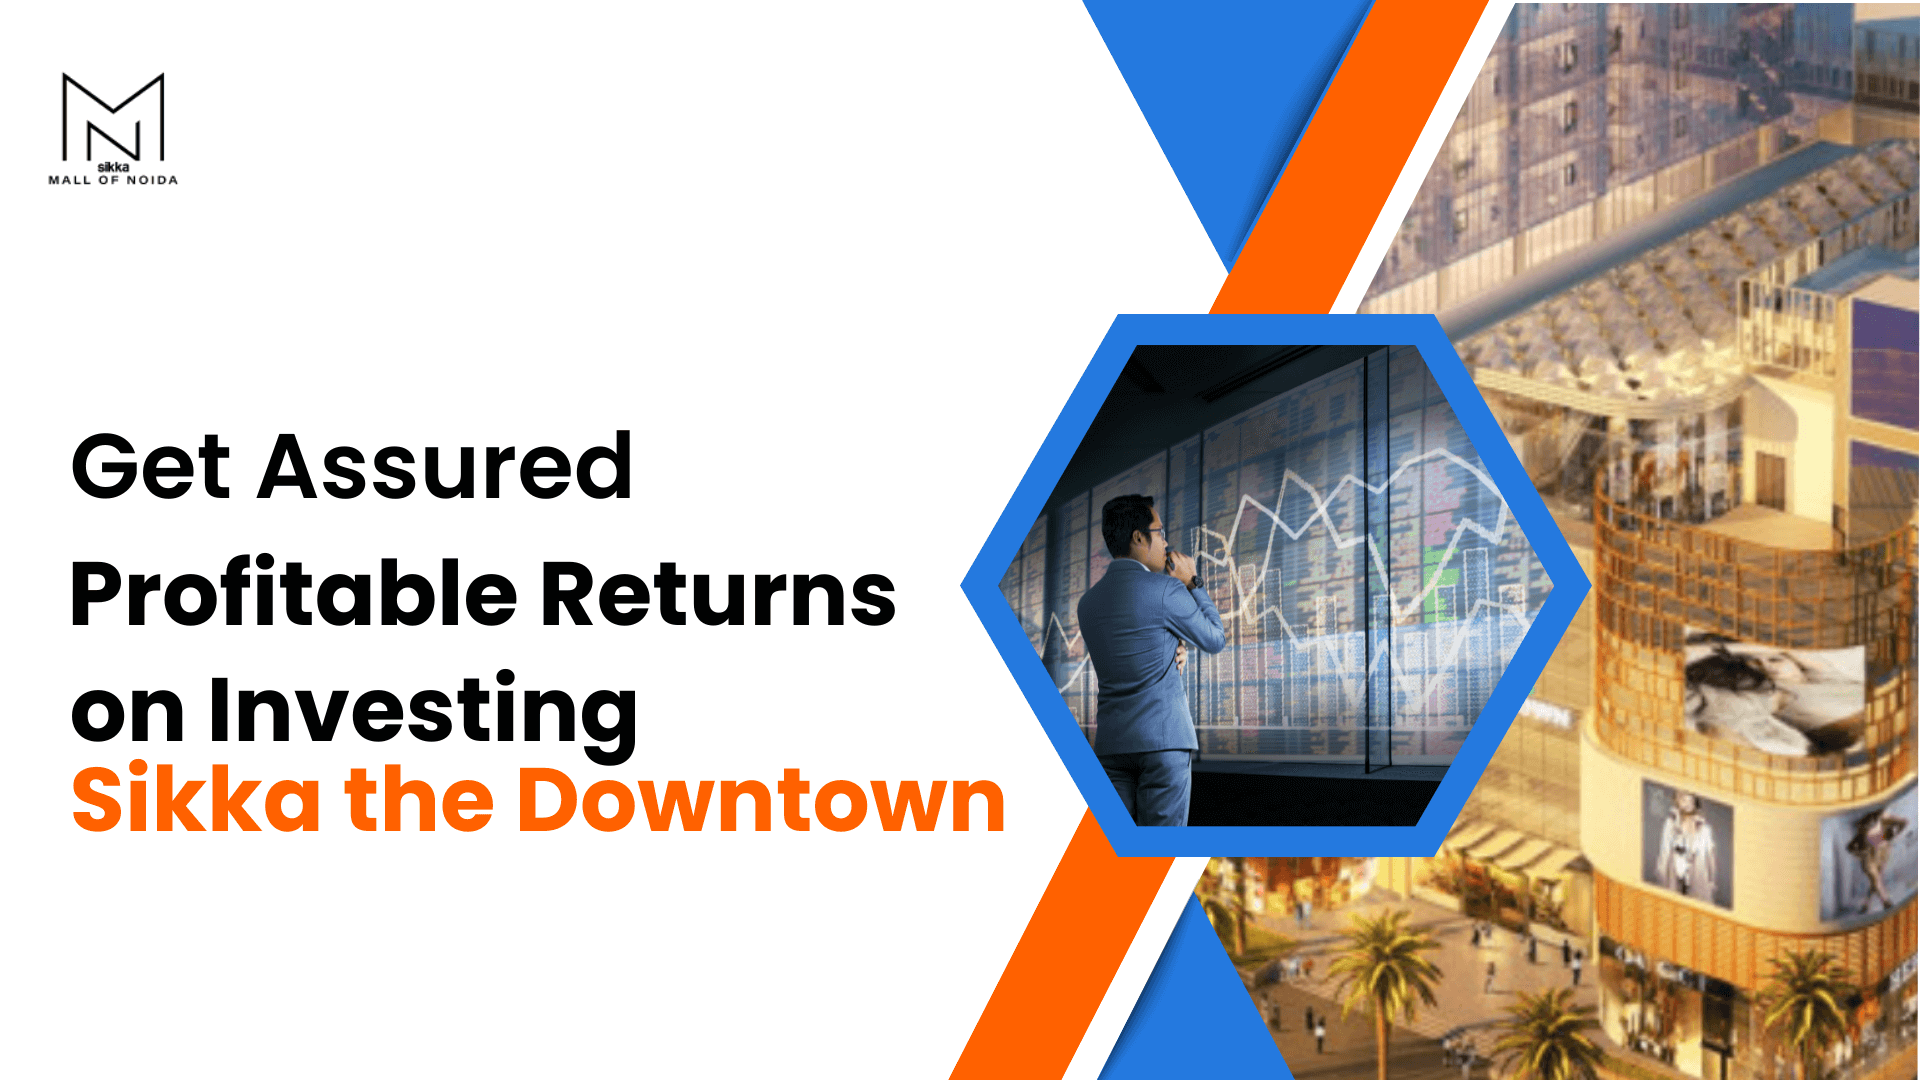 Get Assured & Profitable Returns on Investing Sikka the Downtown - Mall of Noida Sector 98